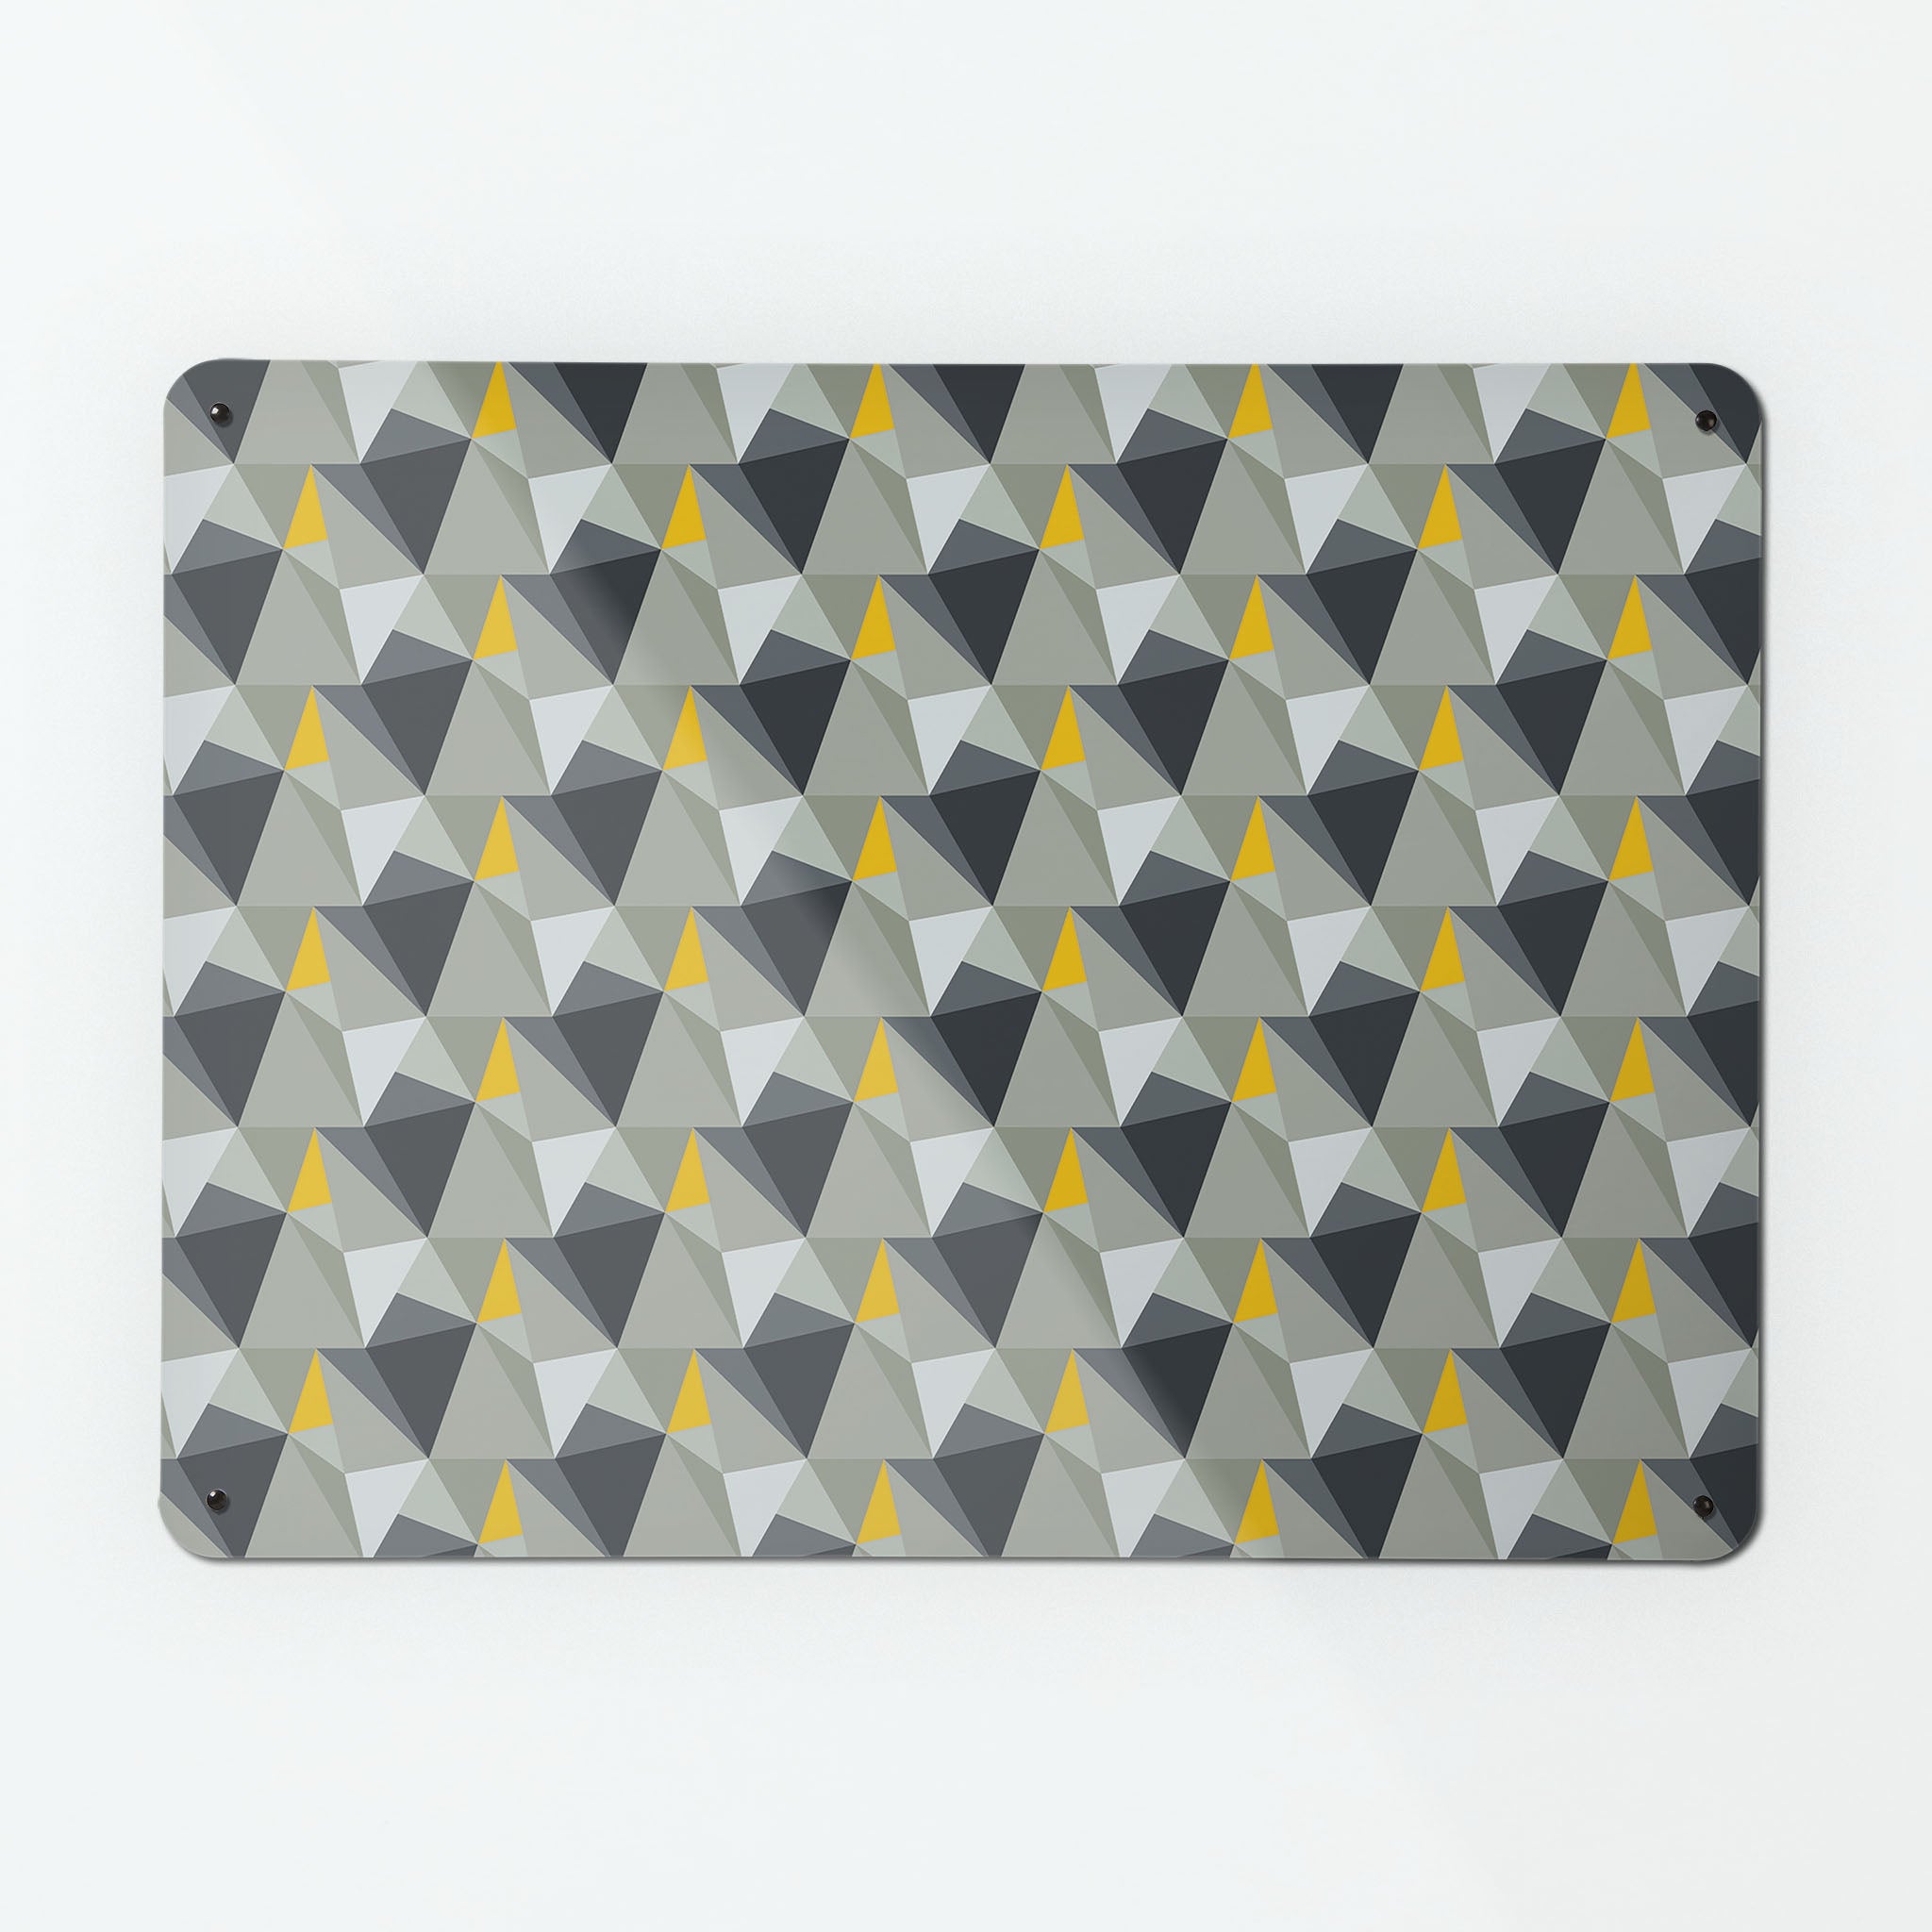 A large magnetic notice board by Beyond the Fridge with a shards geometric design in grey and yellow colours